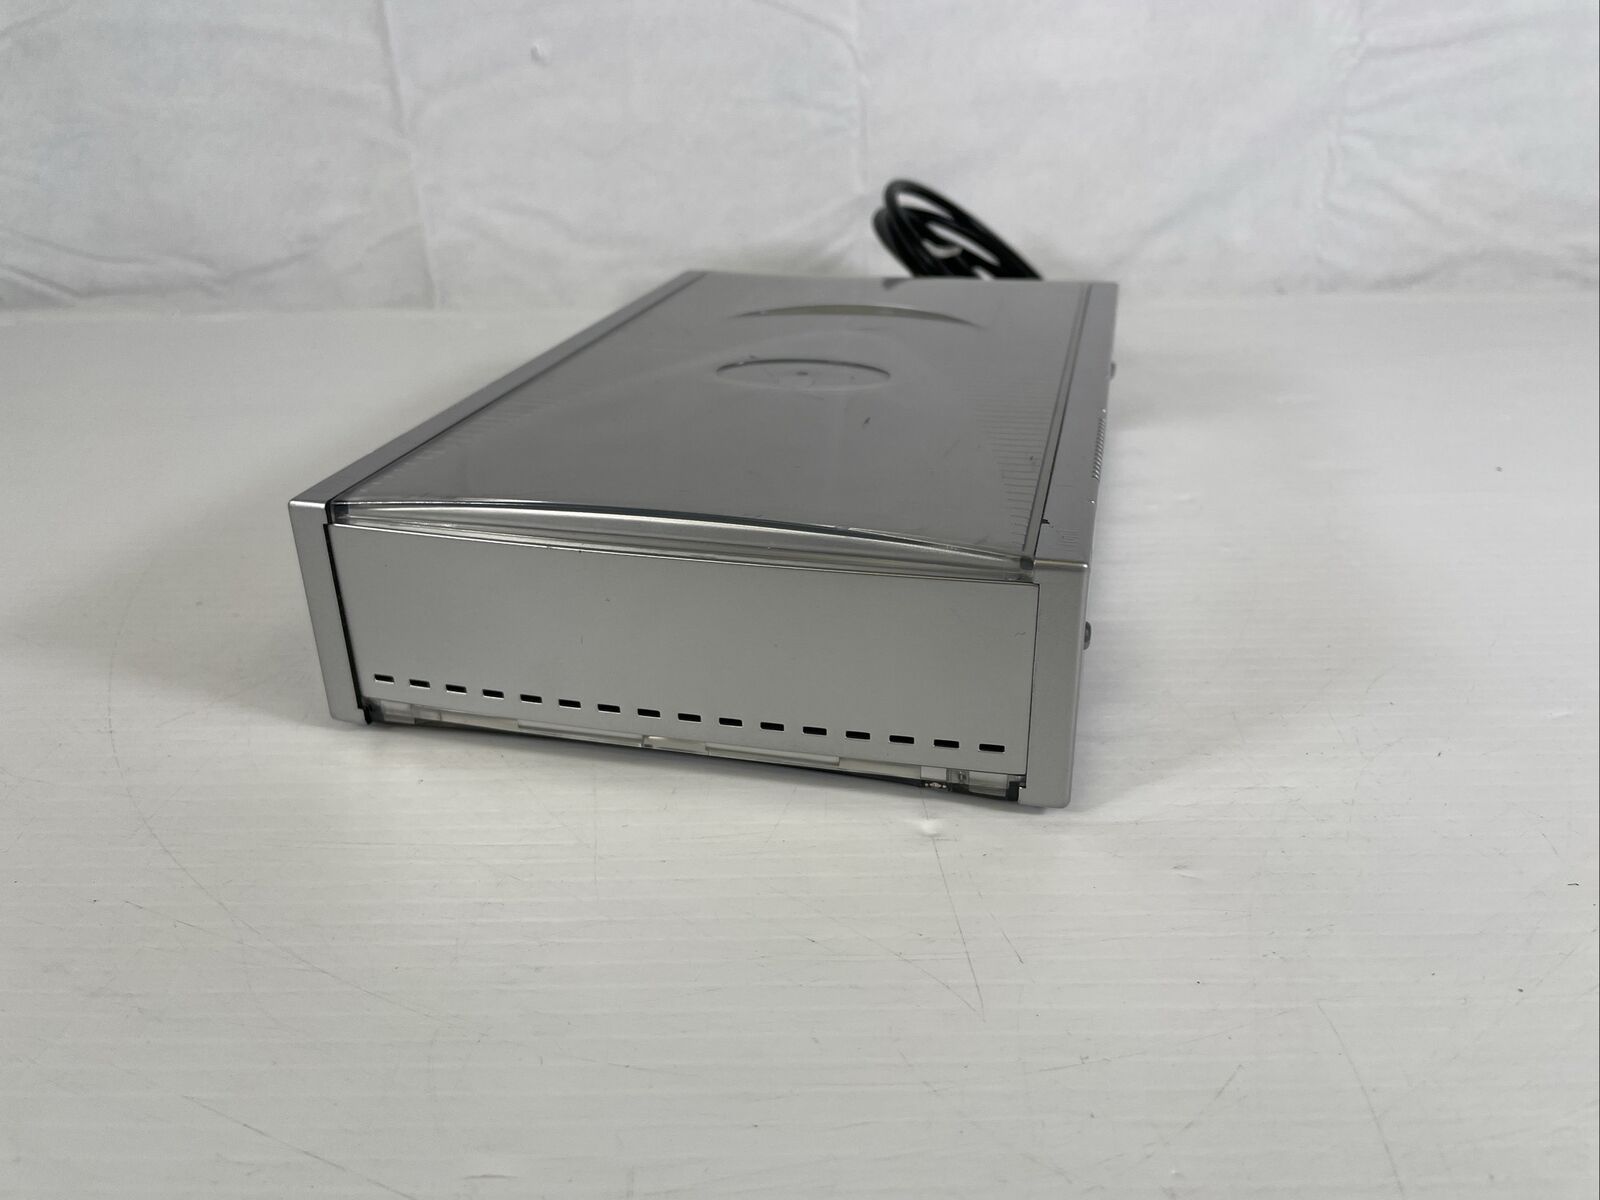 Plumax Vintage EXTERNAL HARD DRIVE (0011176) 40 GB - Wiped, tested and working.